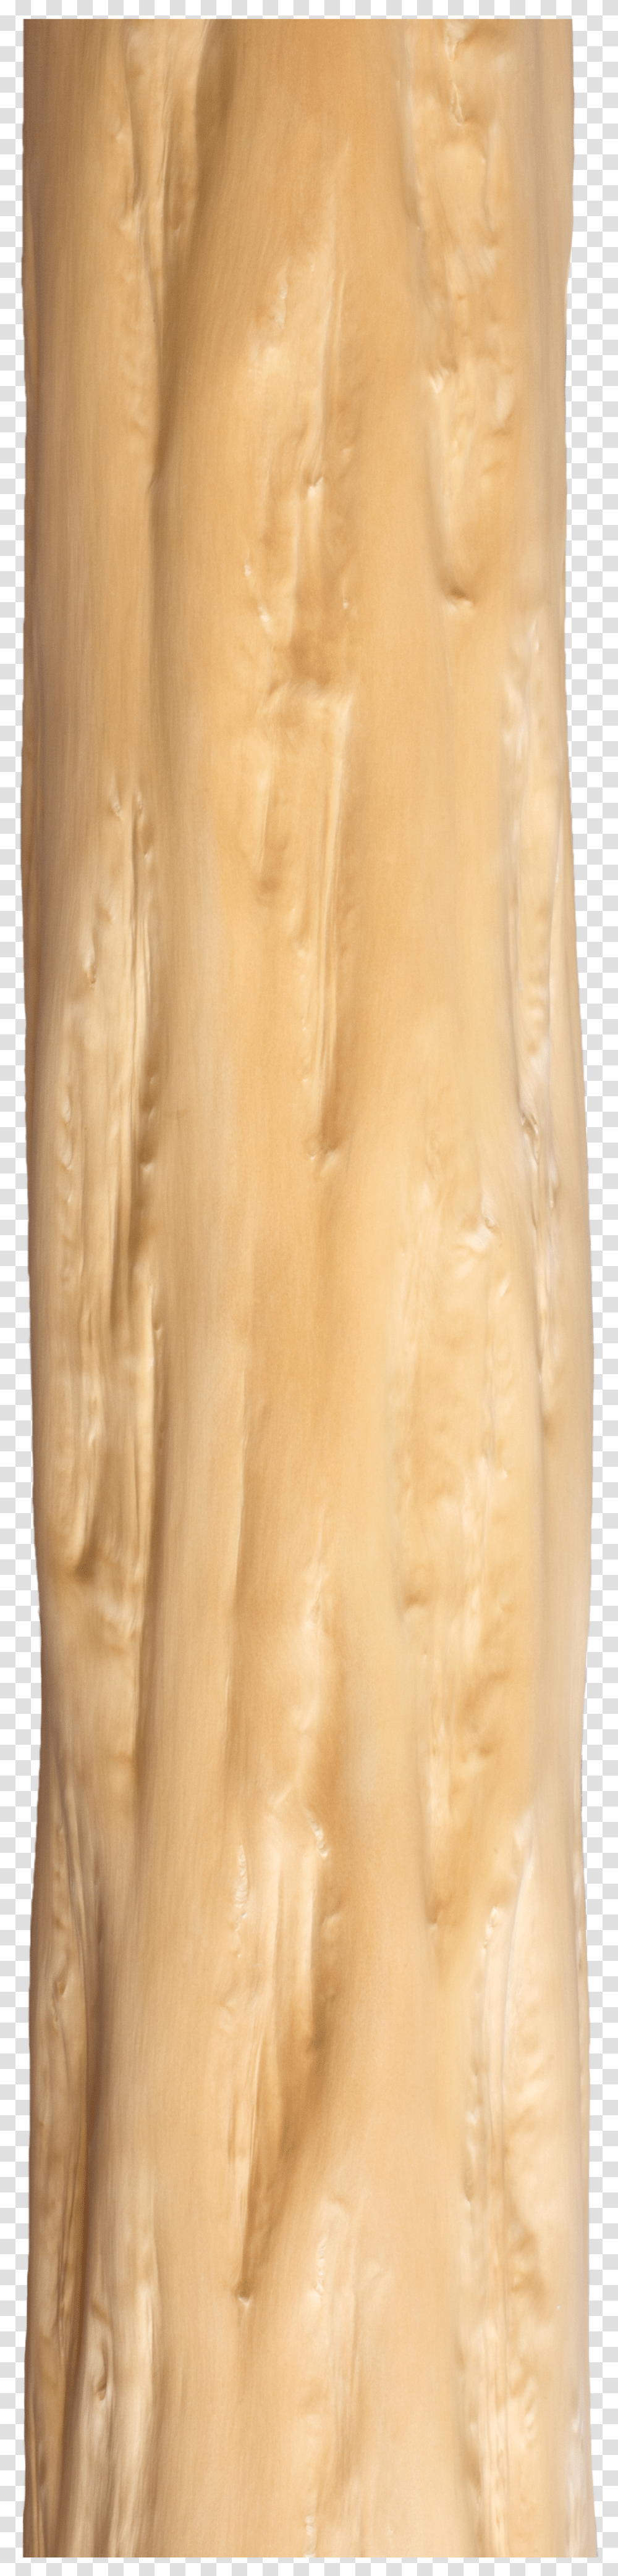 Tree Trunk Over The Bark Of The Treetree Trunk Plywood Transparent Png